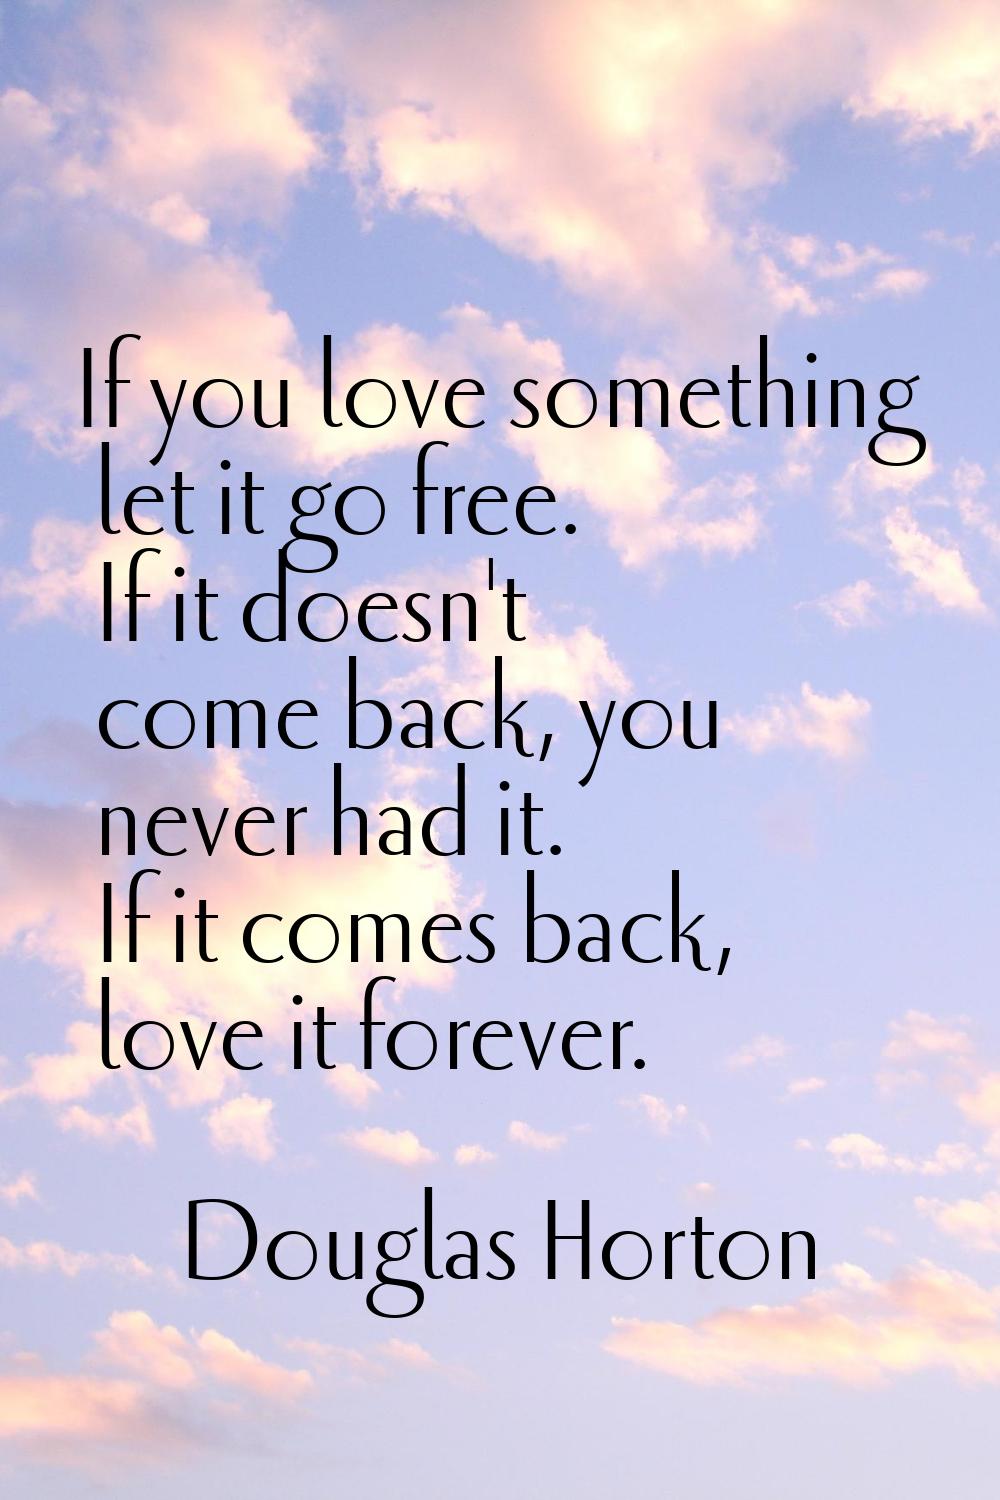 If you love something let it go free. If it doesn't come back, you never had it. If it comes back, 